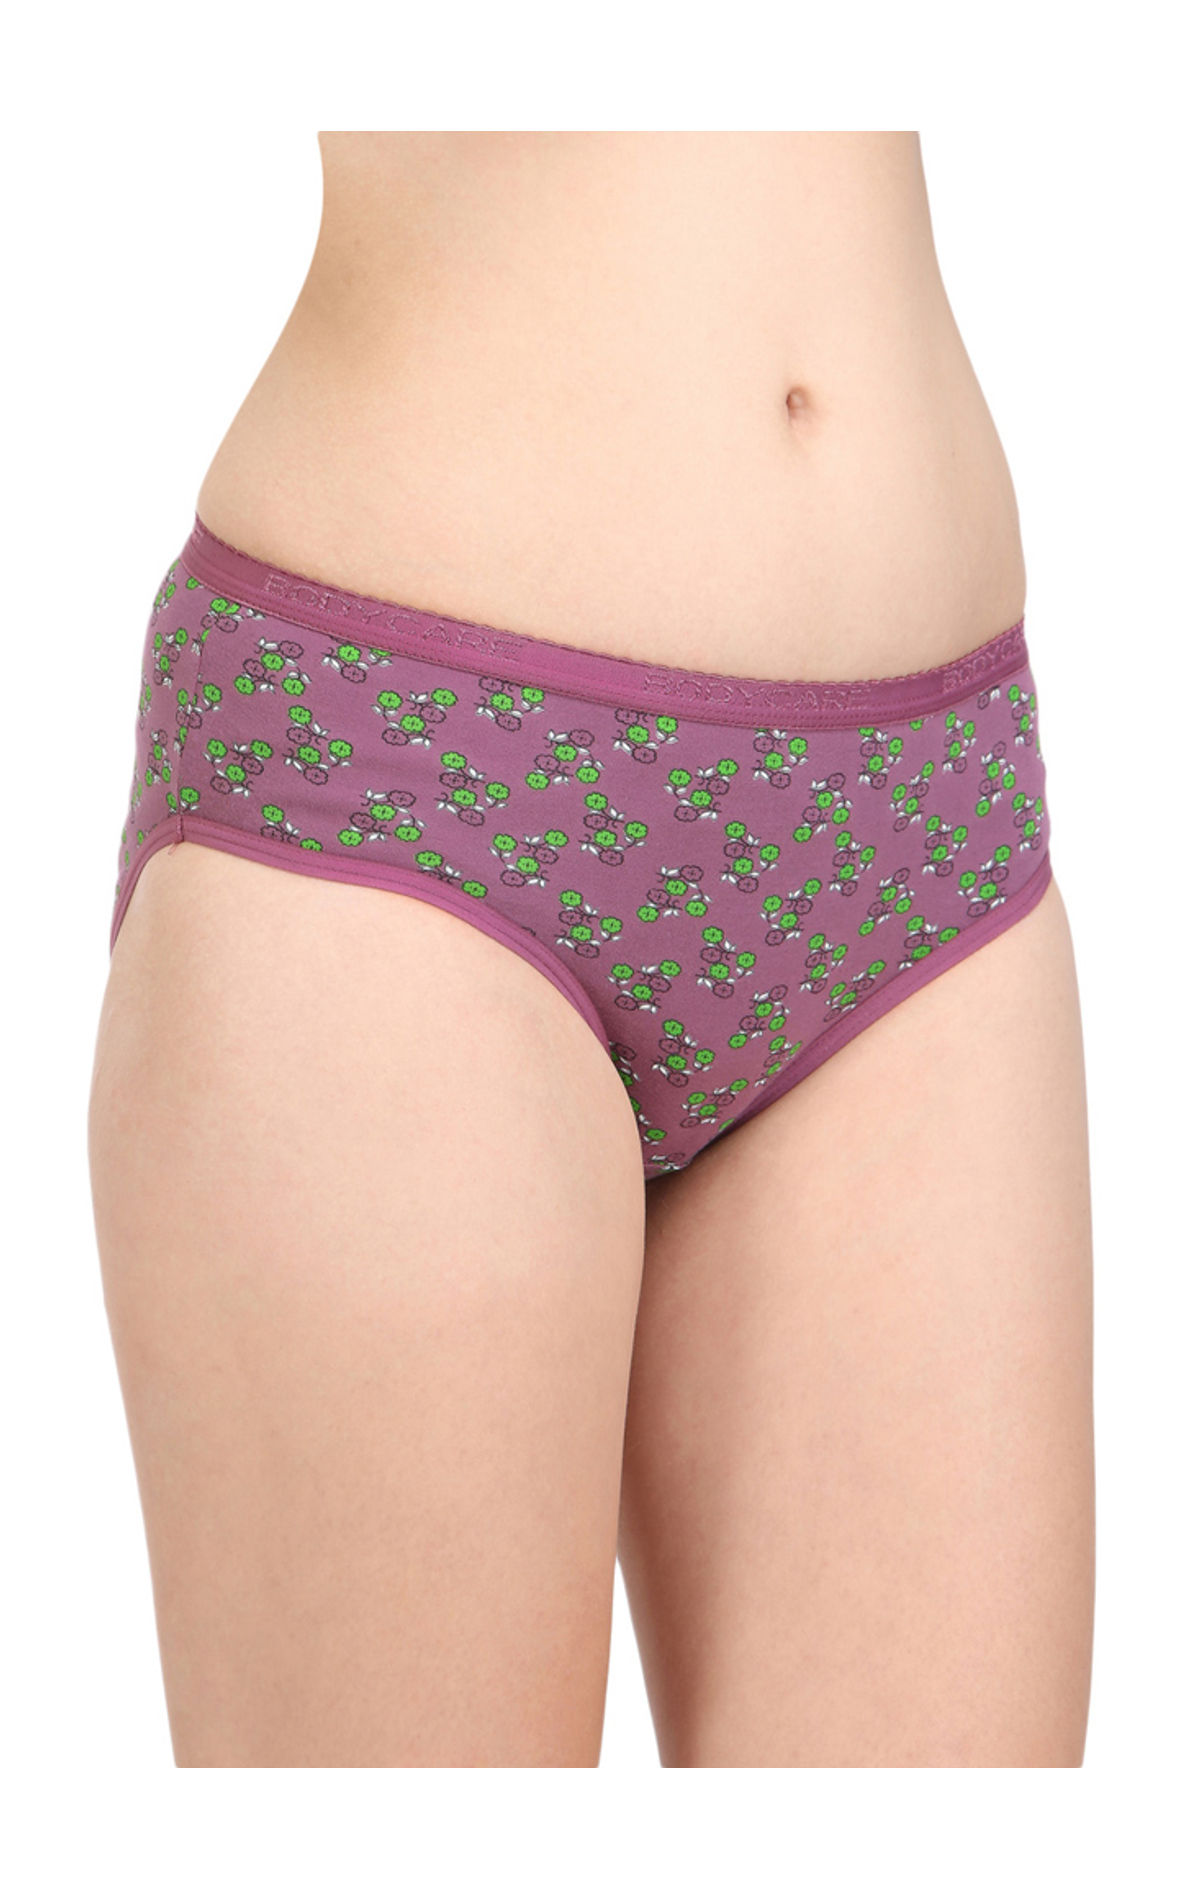 Cotton Printed Bodycare 8200 Ladies Brief Panty at Rs 425/piece in